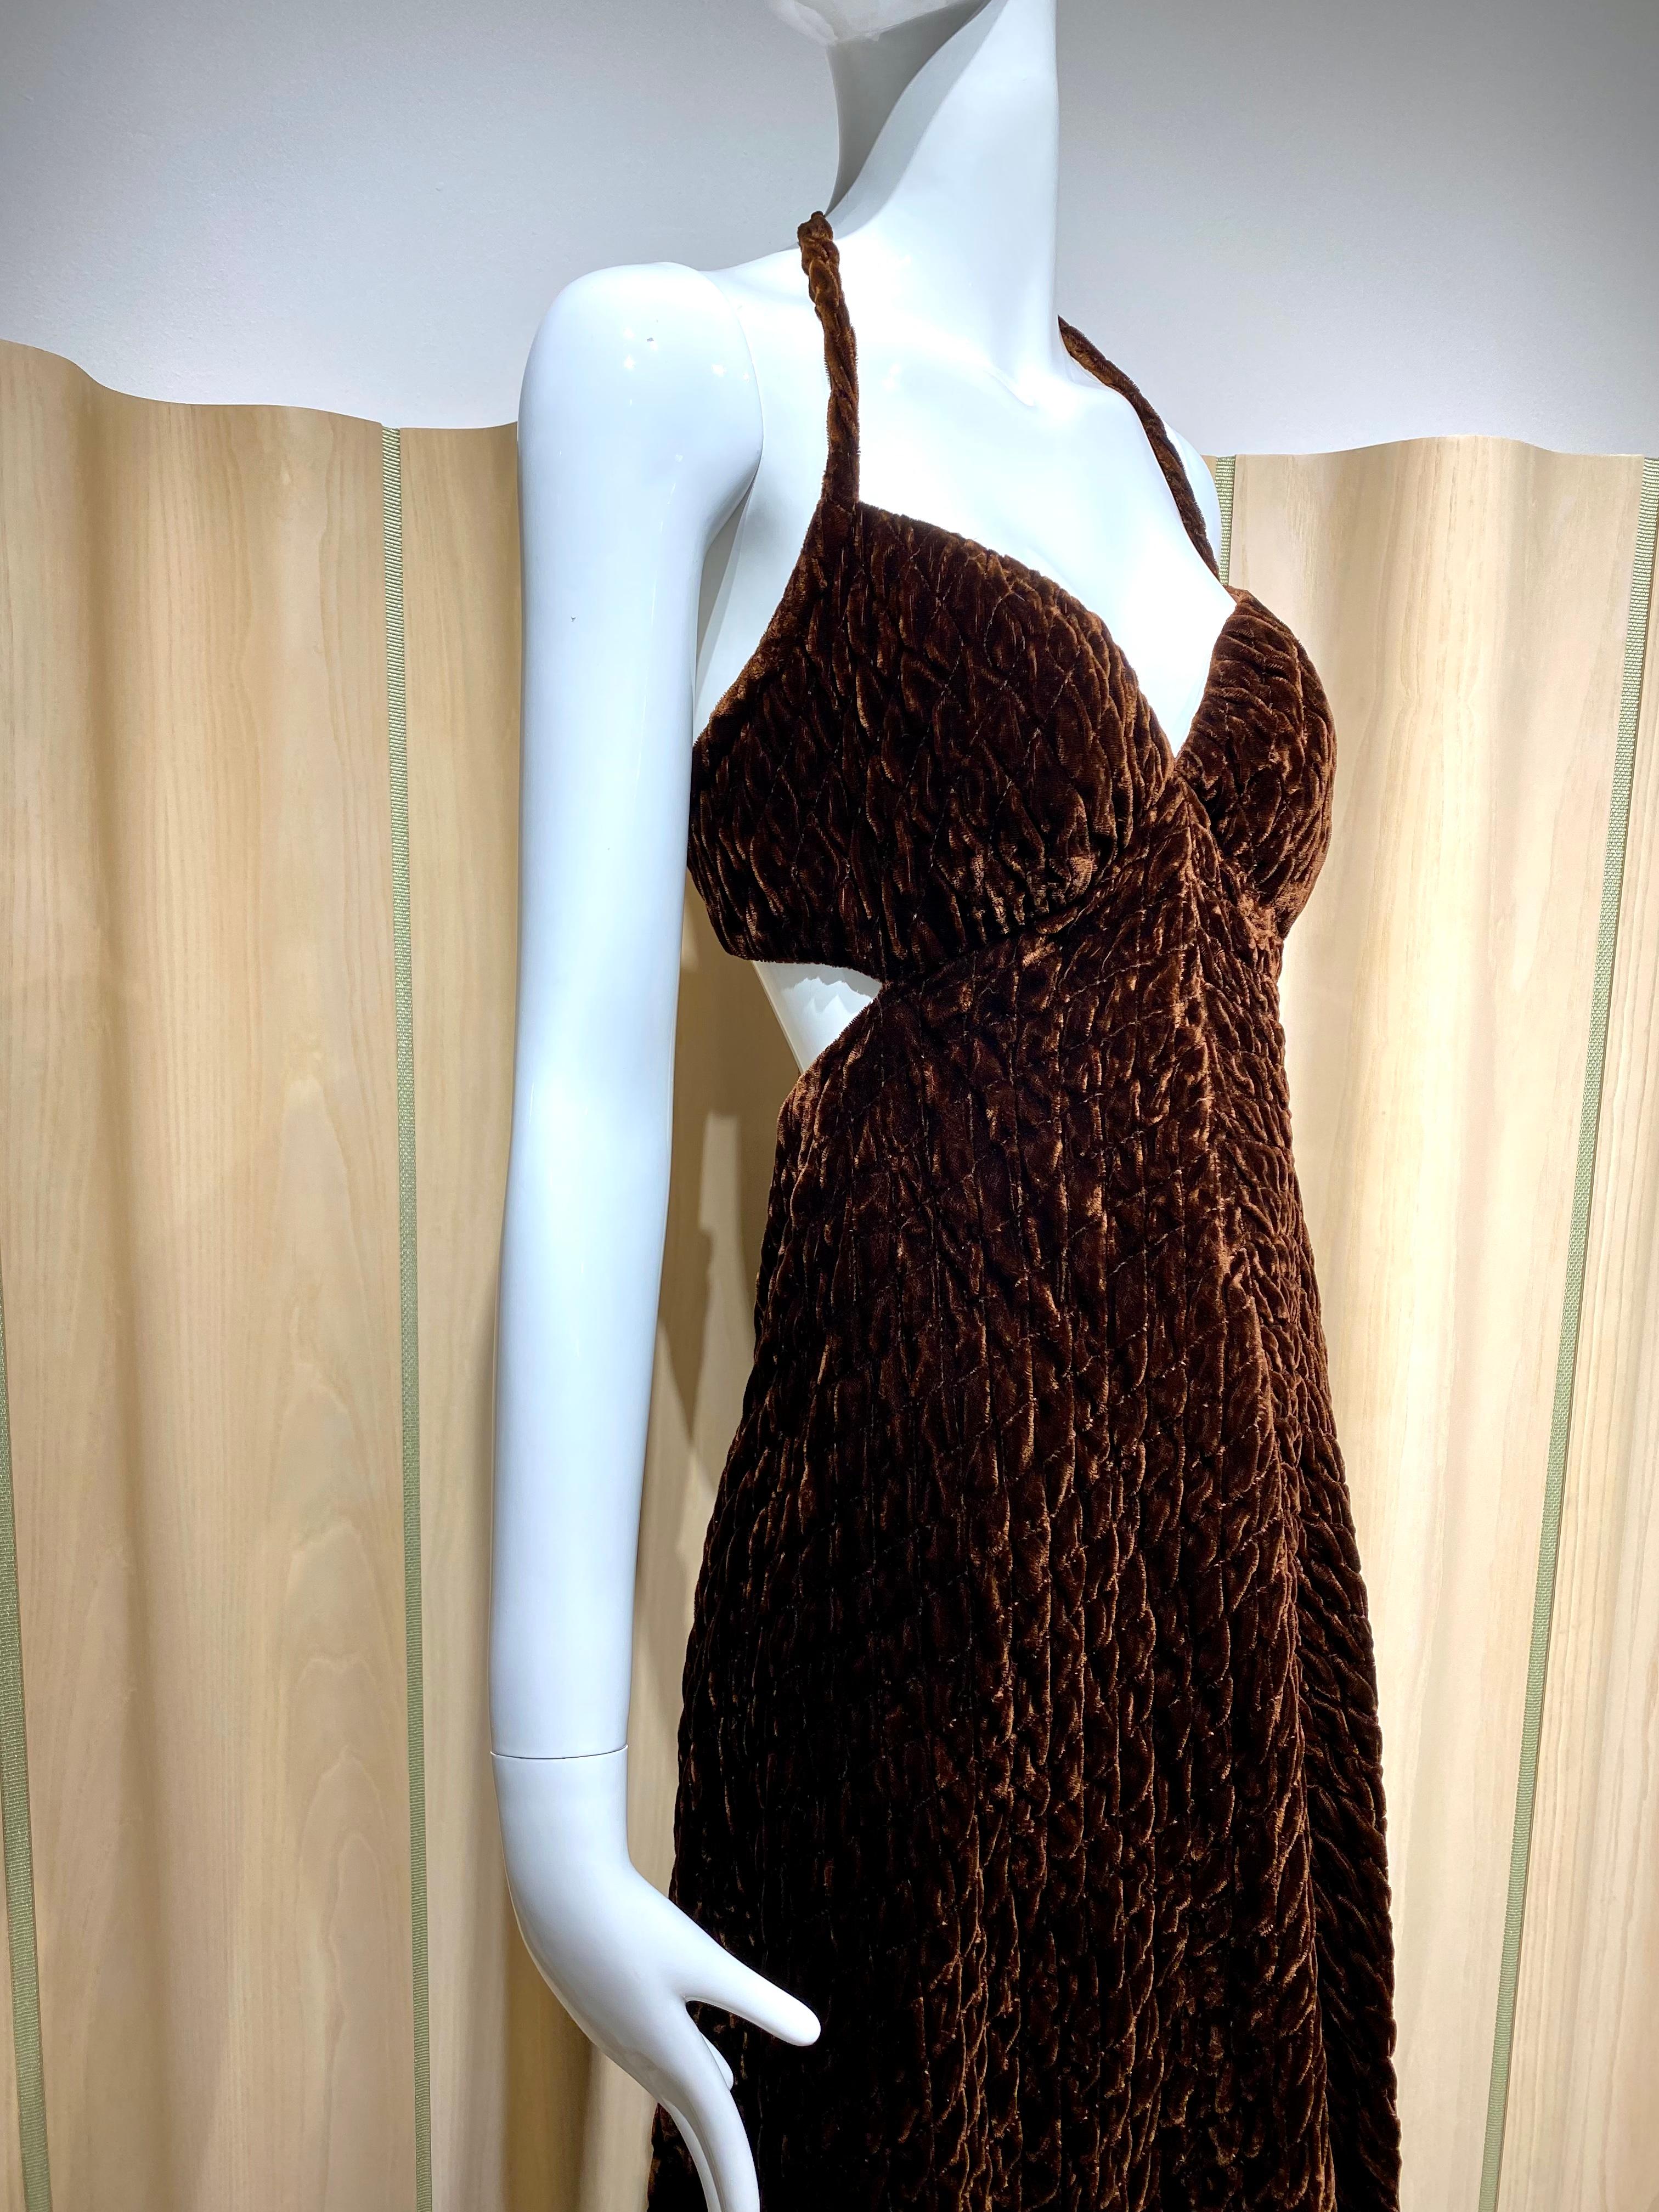 1970s GALANOS from Amelia Gray Boutique - Beverly hills brown  Velvet Gown.
Size 2/XS
Bust: 32”